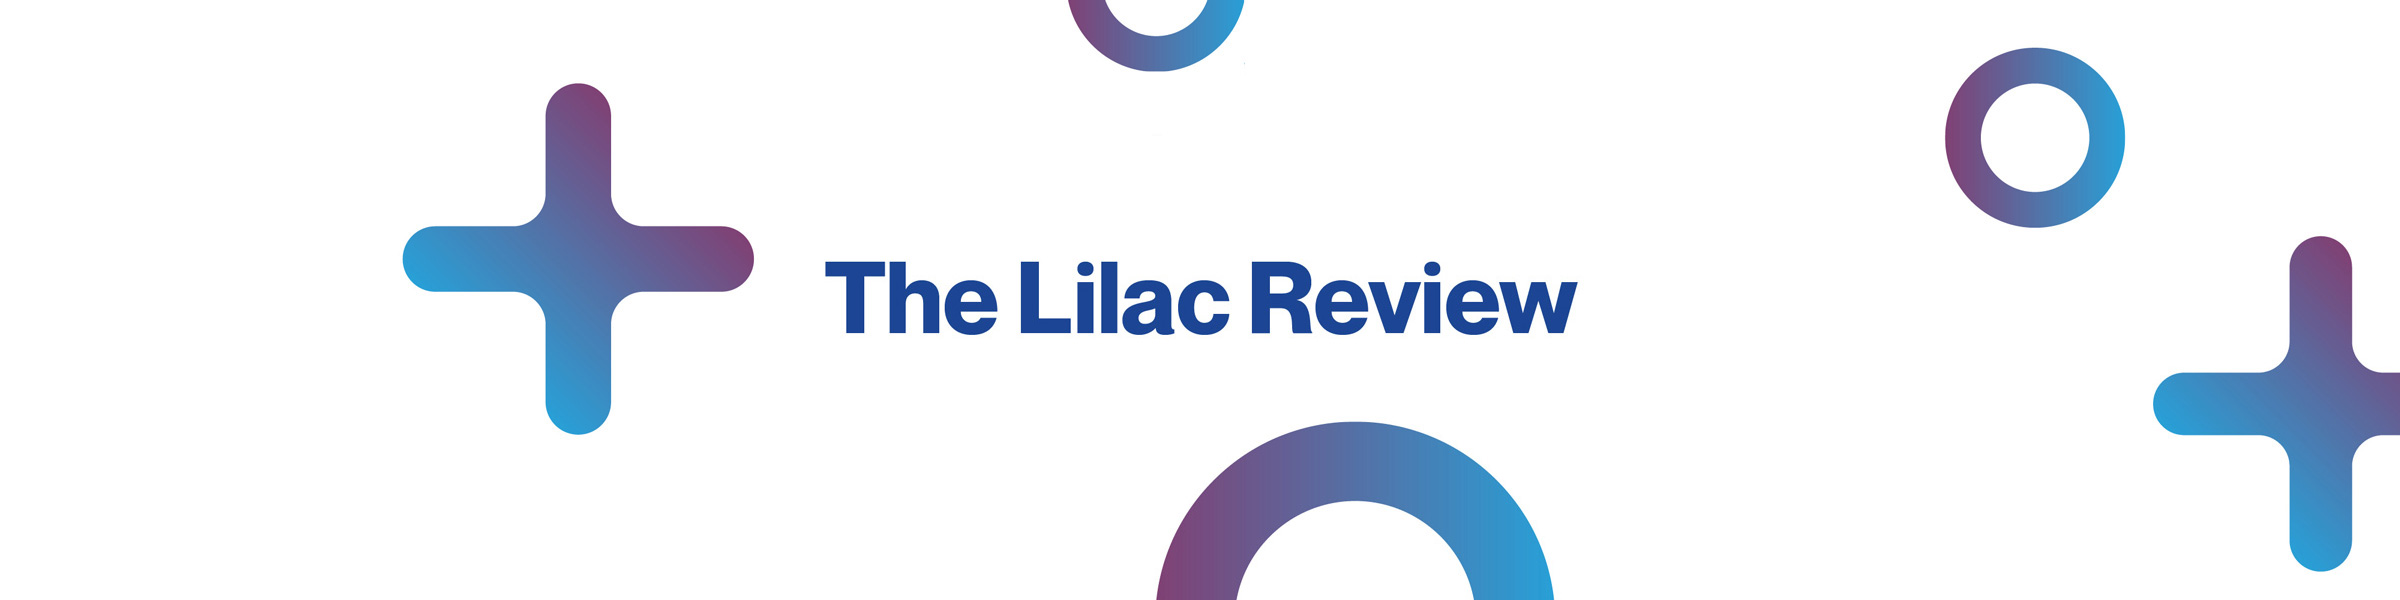 A white background with the words 'The Lilac Review' in the centre. The words are surrounded by various shapes in shades of blue and purple.